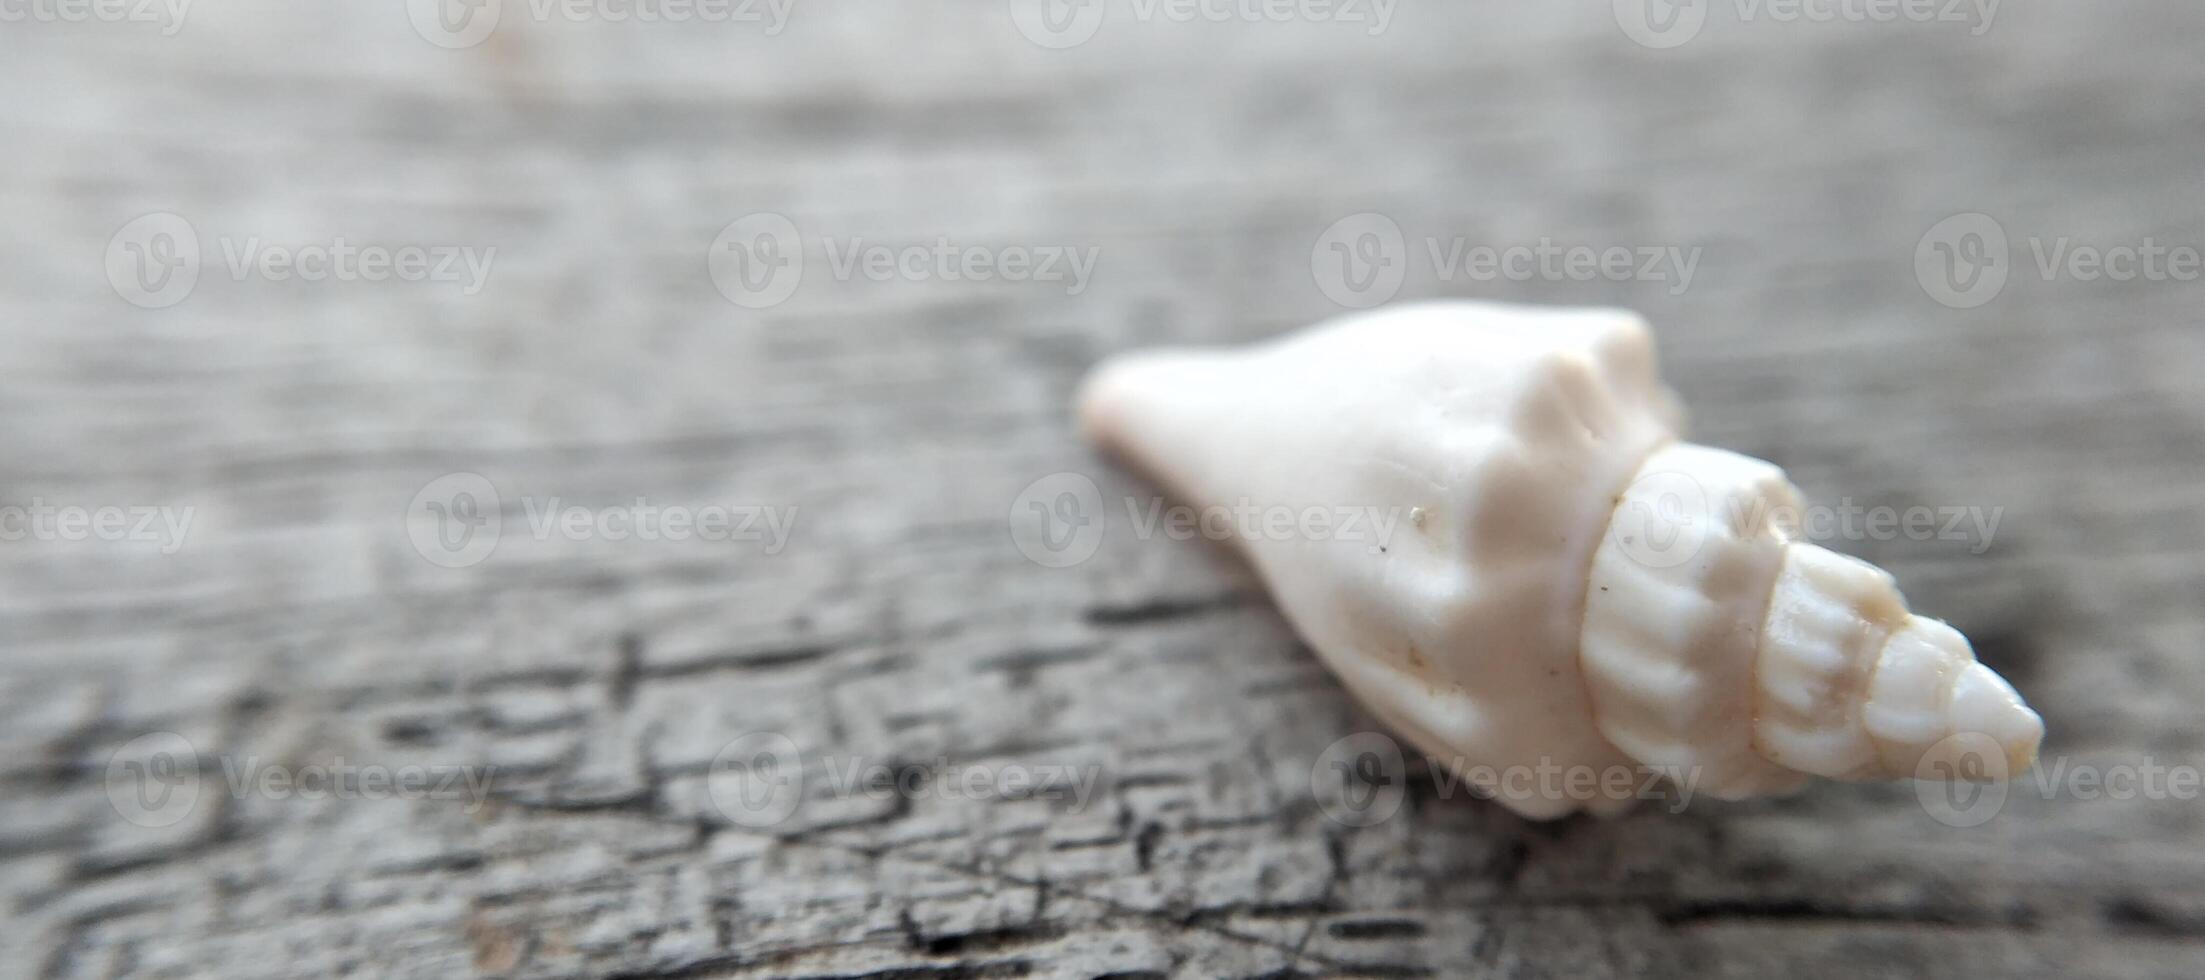 Seashell on a wooden background. Close-up. Selective focus. photo